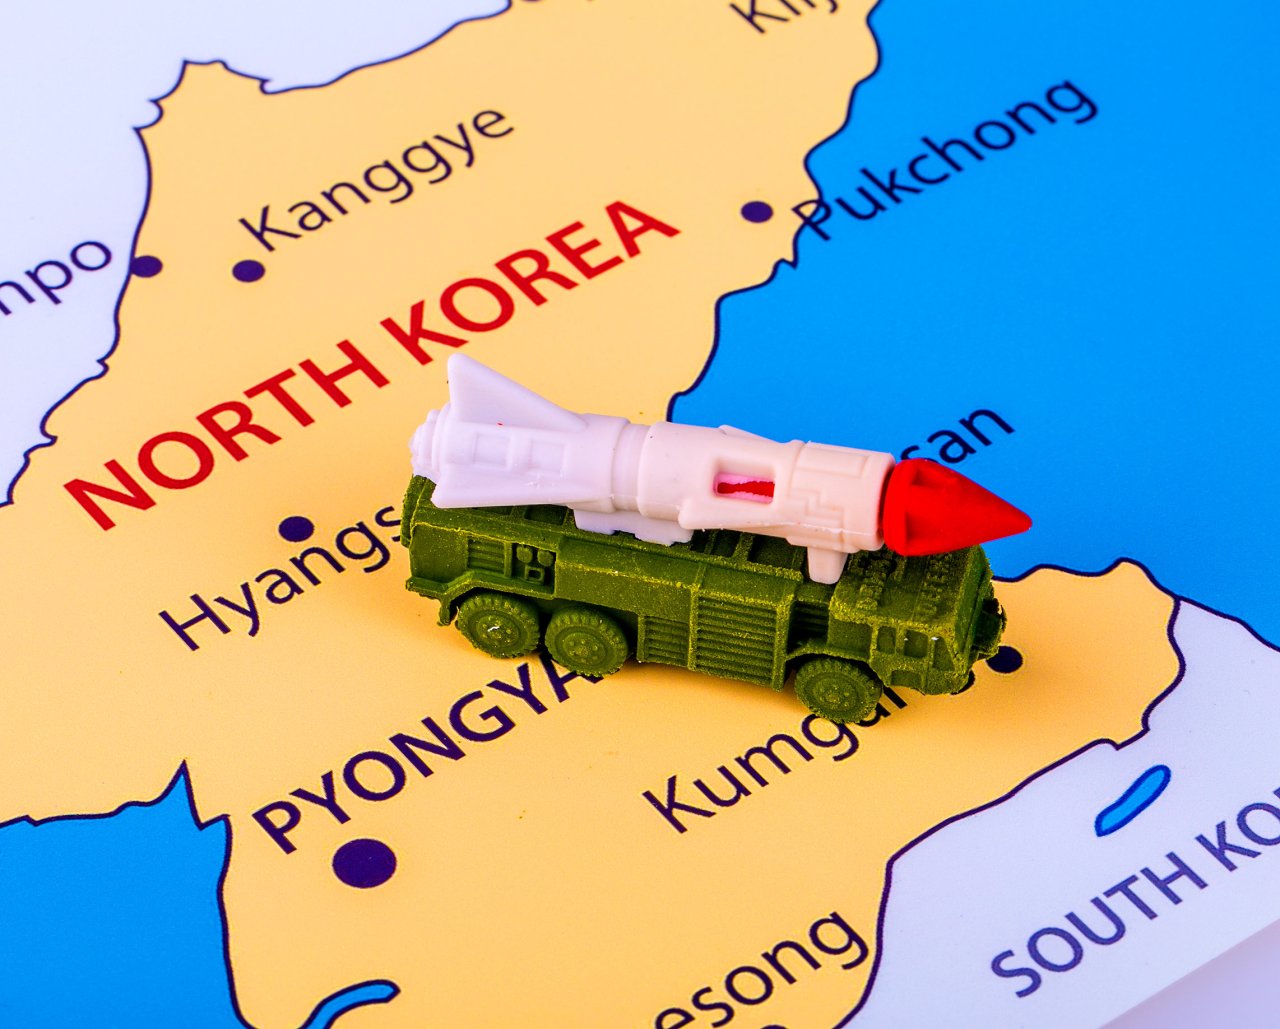 Map of North Korea with a figure of a missile on a transporter erector launcher (123rf)